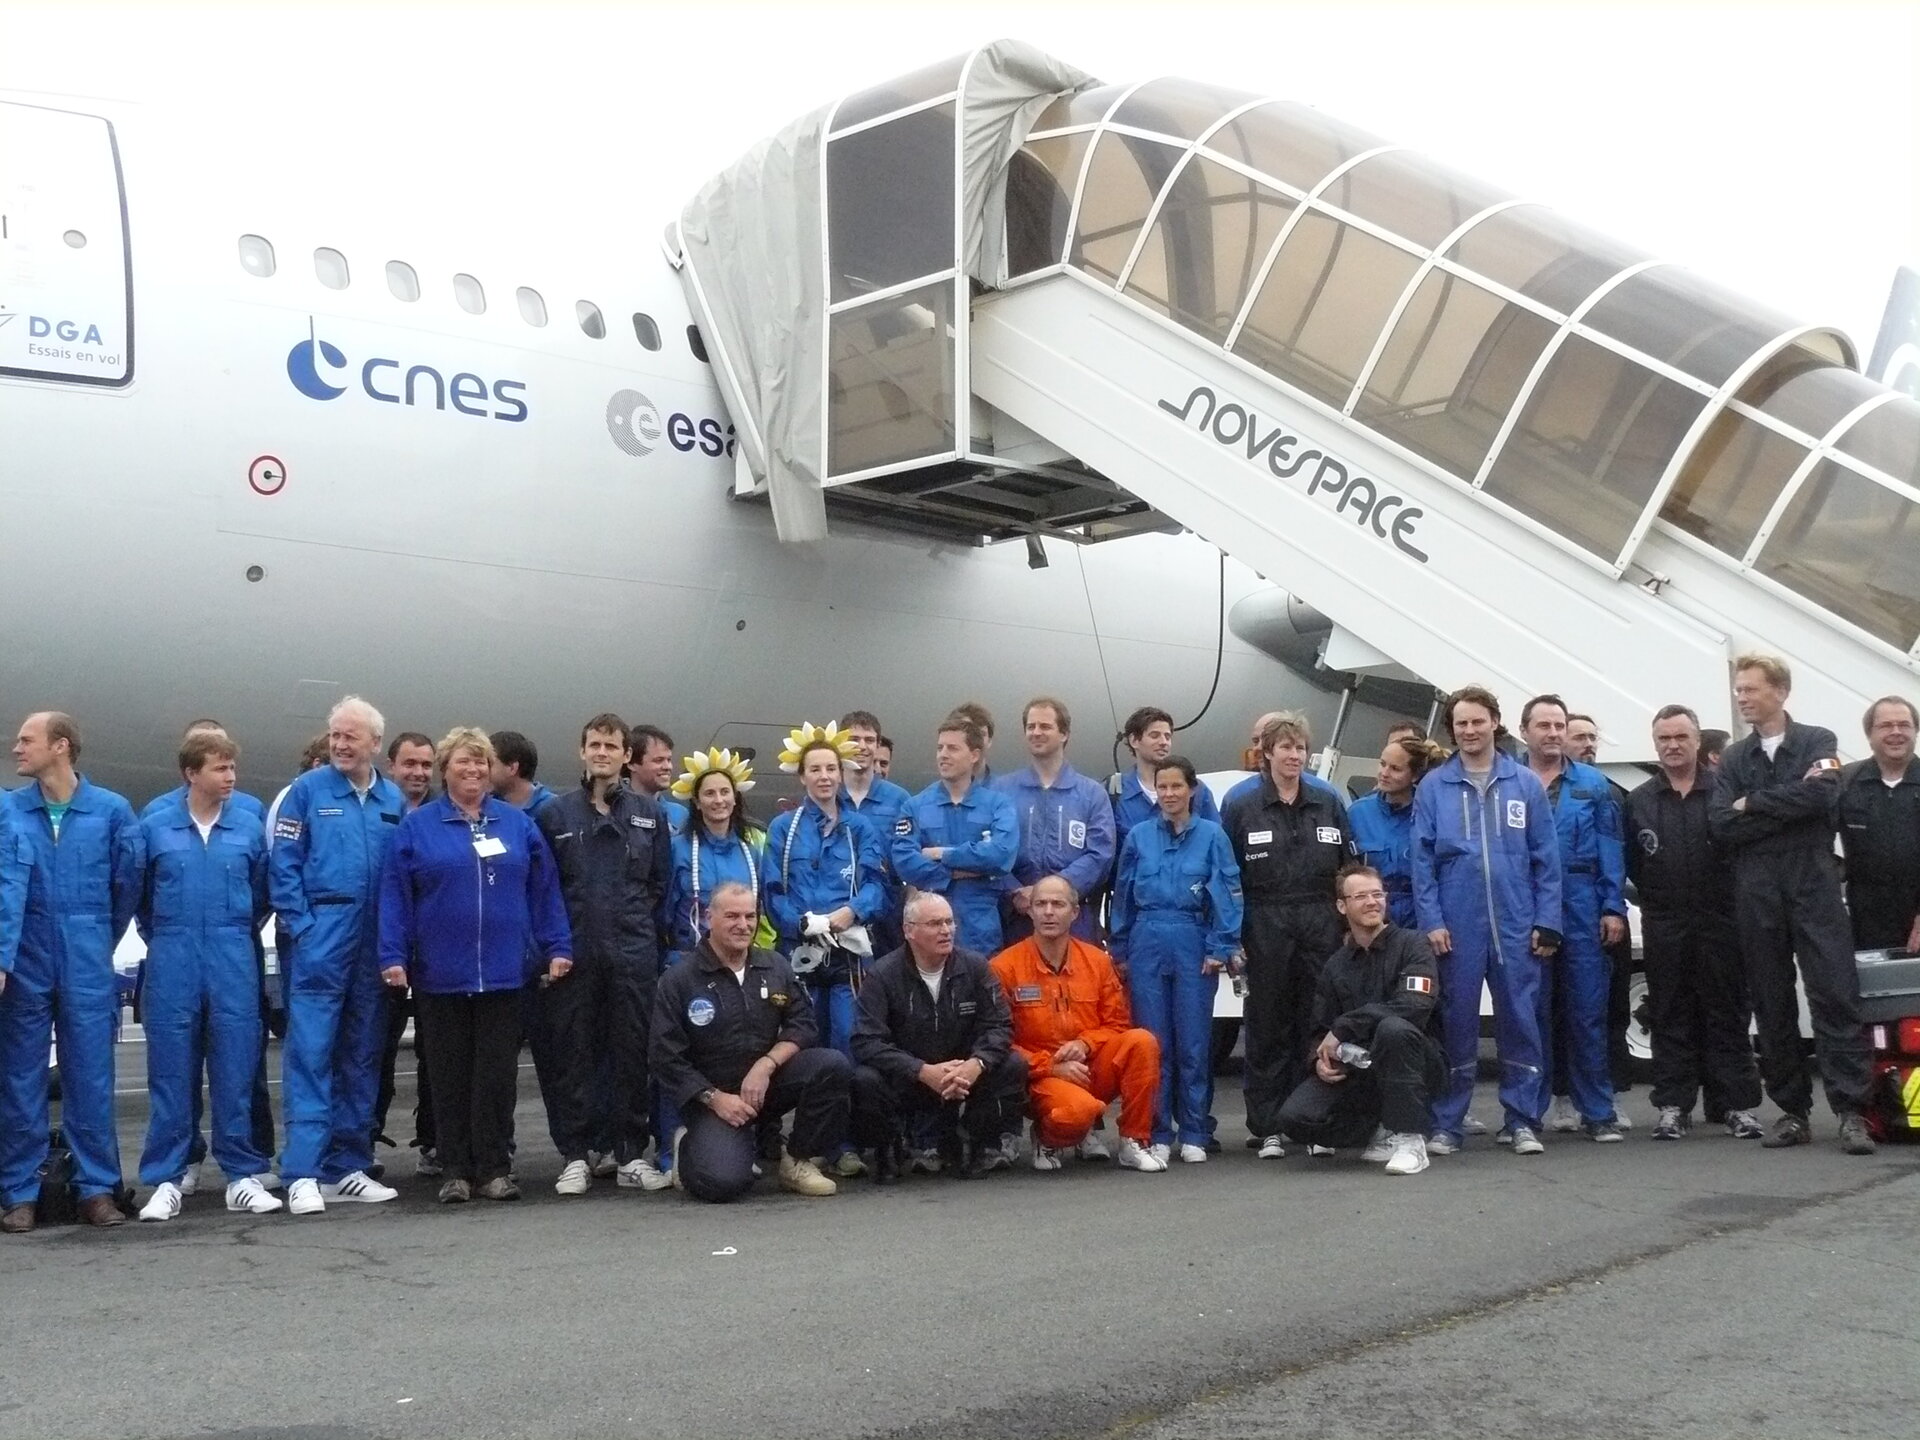 Participants pose under the plane after the flight